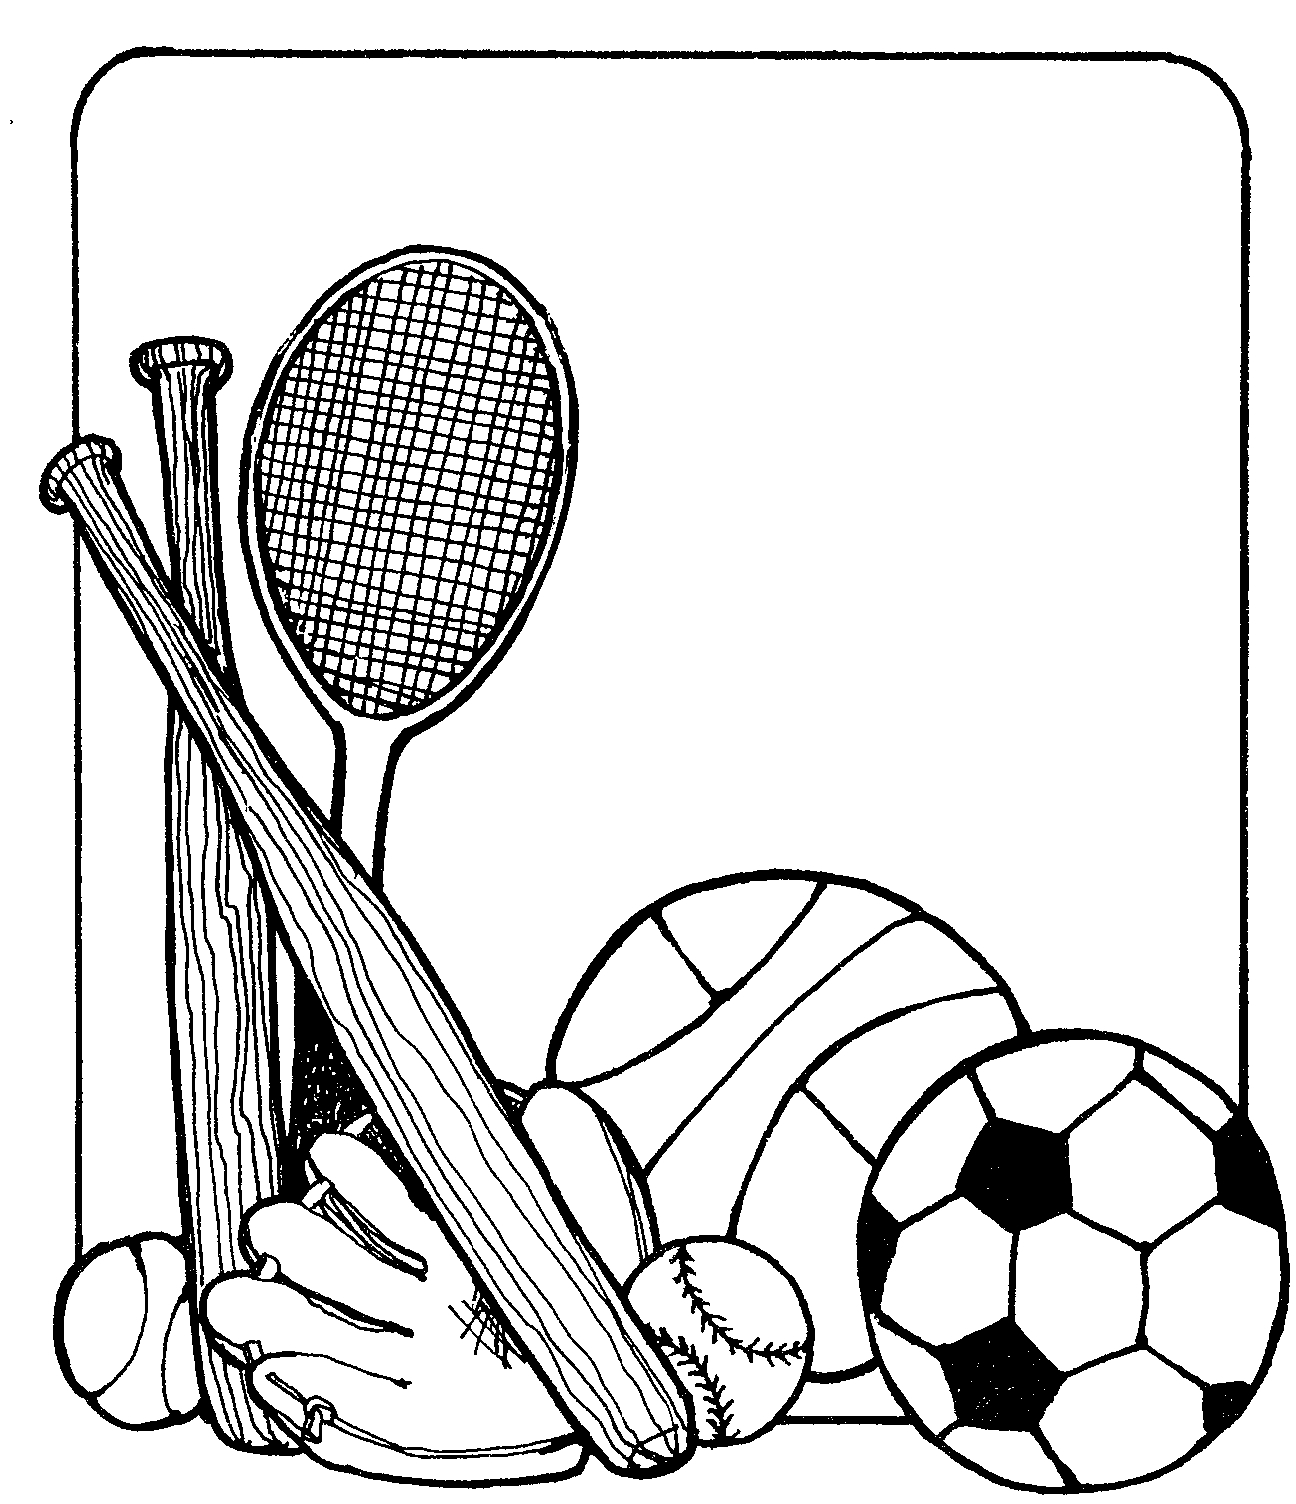 hassle free clipart sports - photo #13